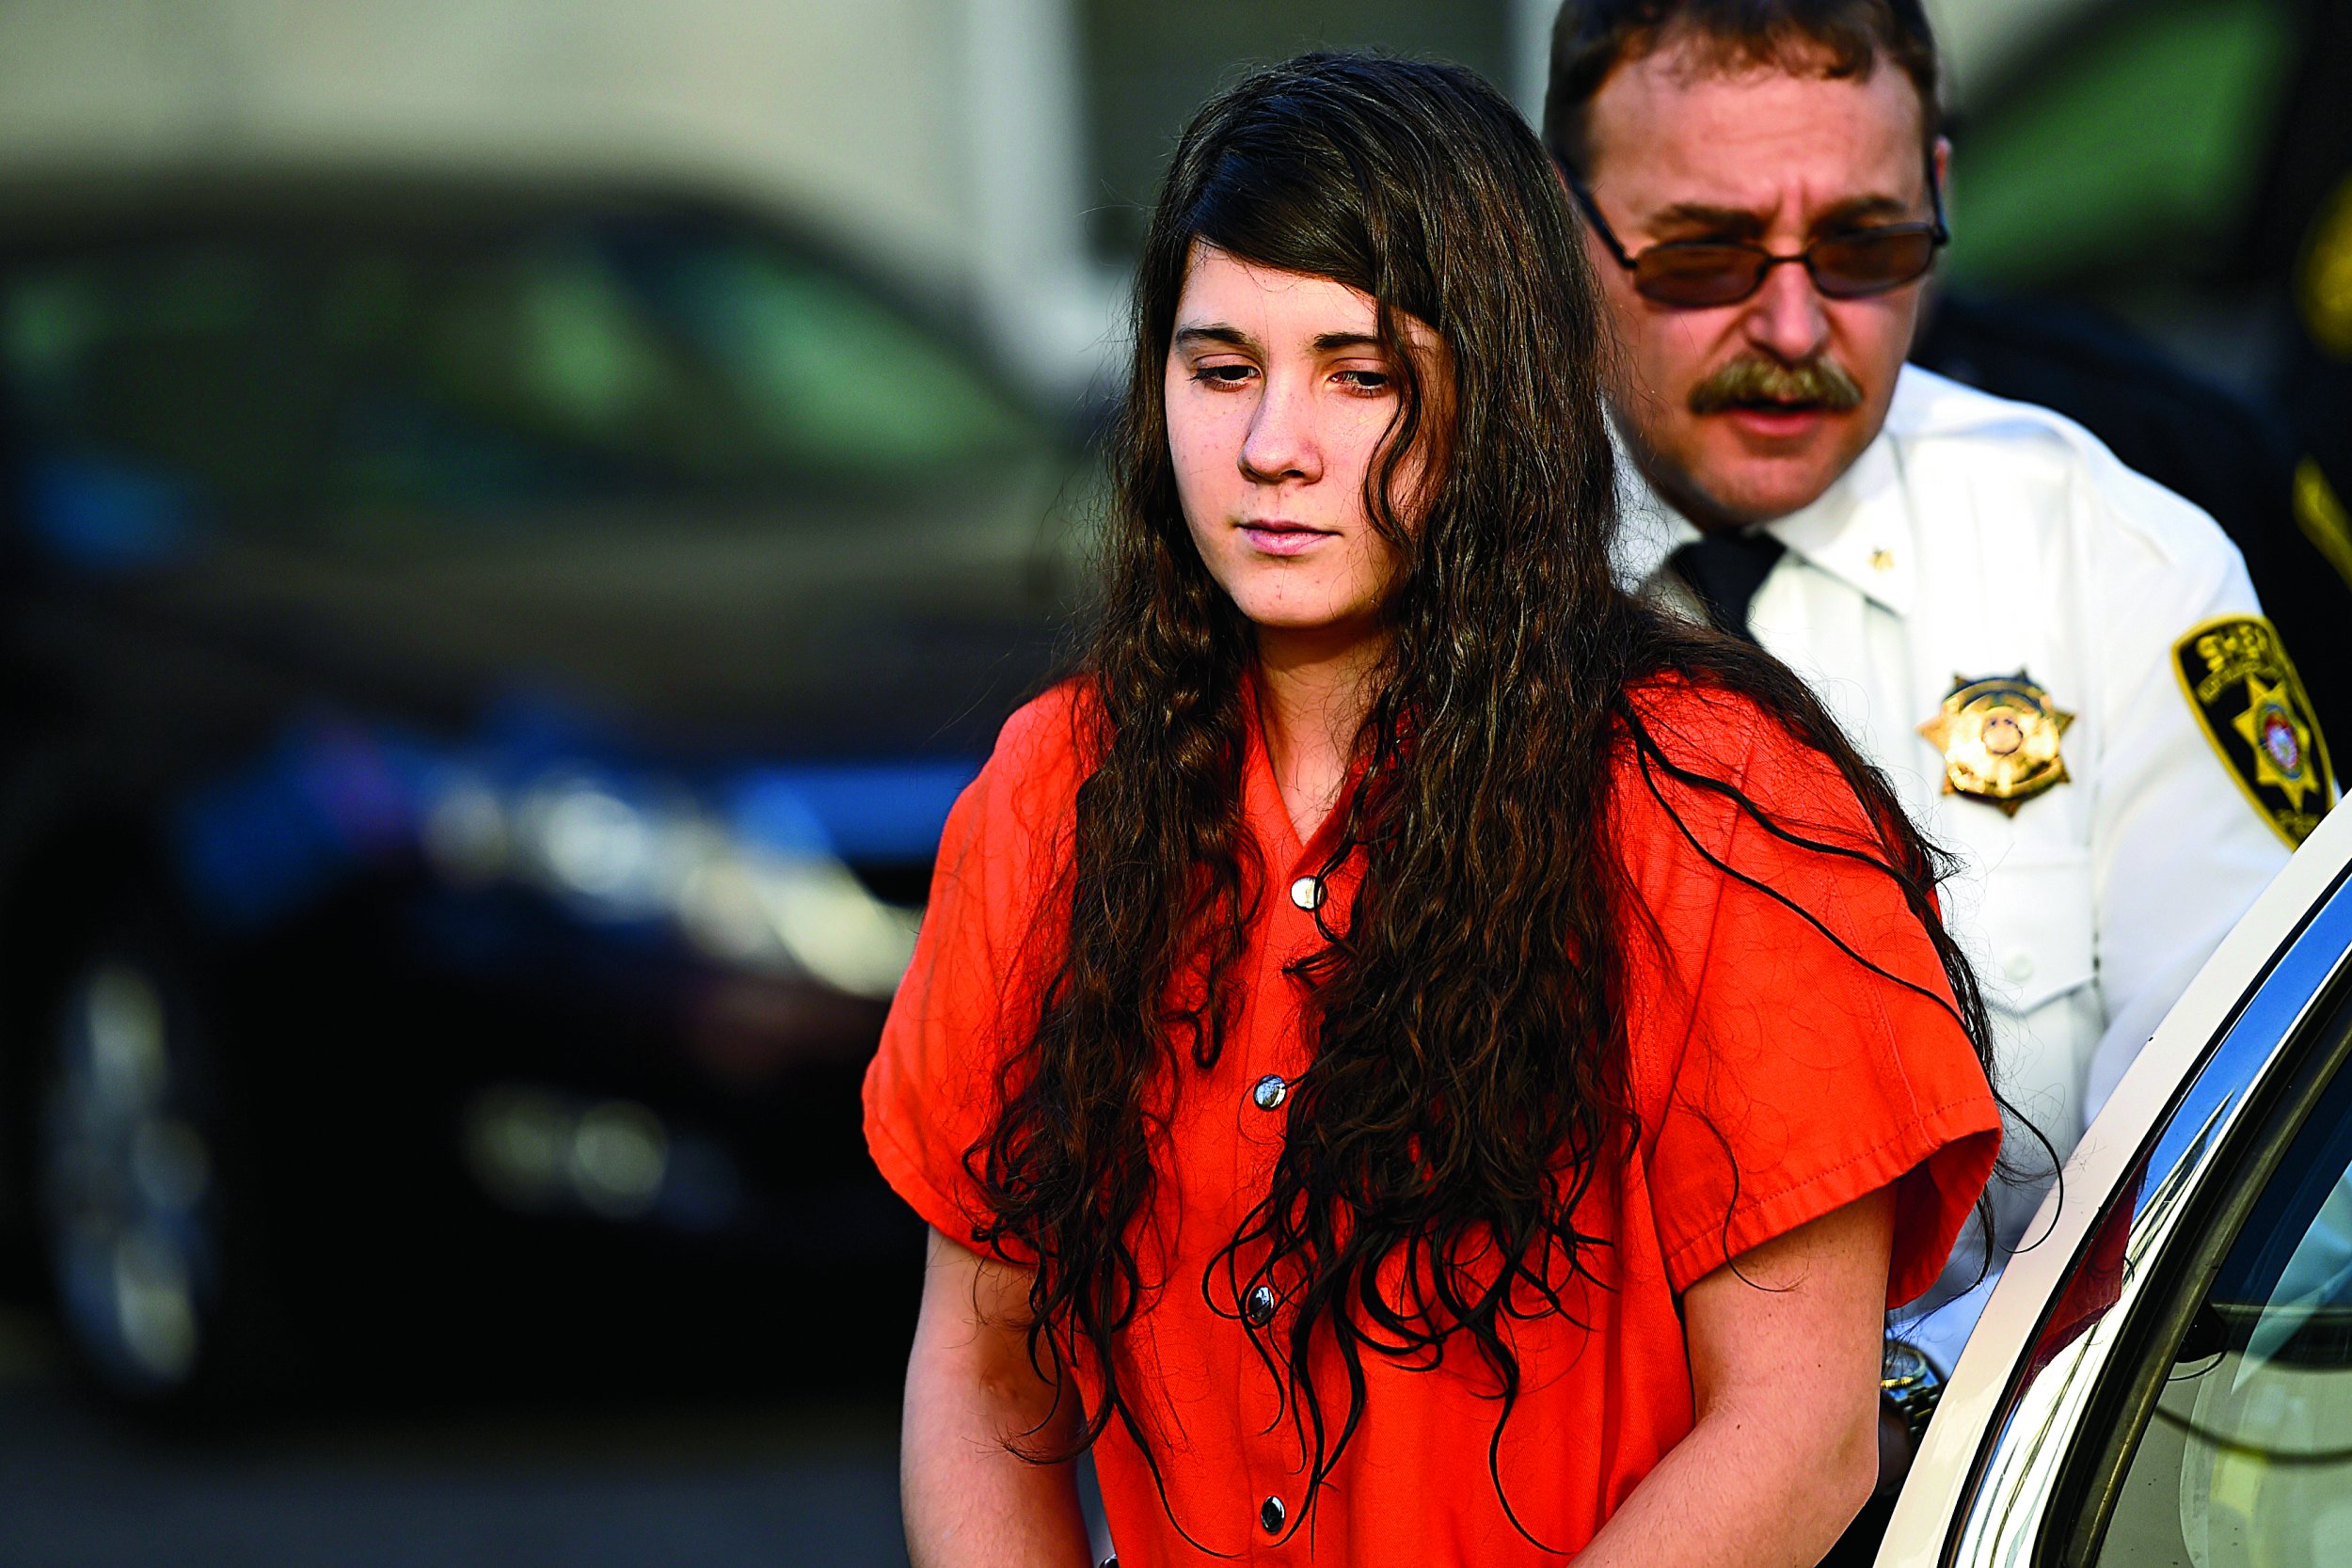 Exclusive Craigslist Killer Miranda Barbour Tells How and Why She Killed picture